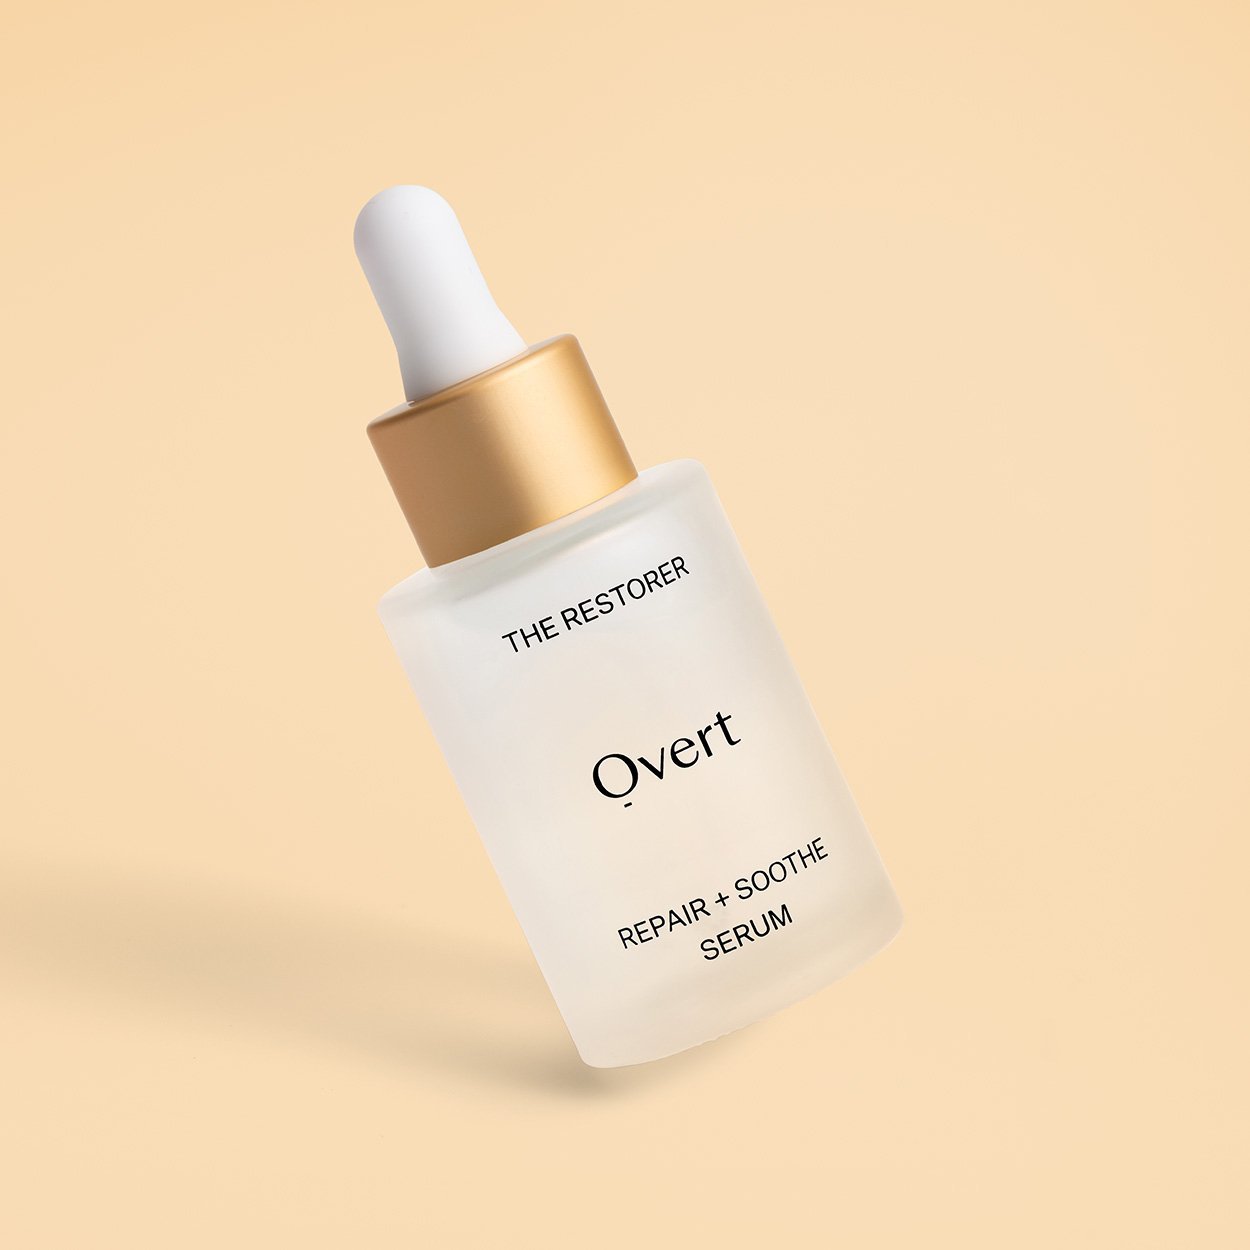 The Anti-Aging Duo by Overt